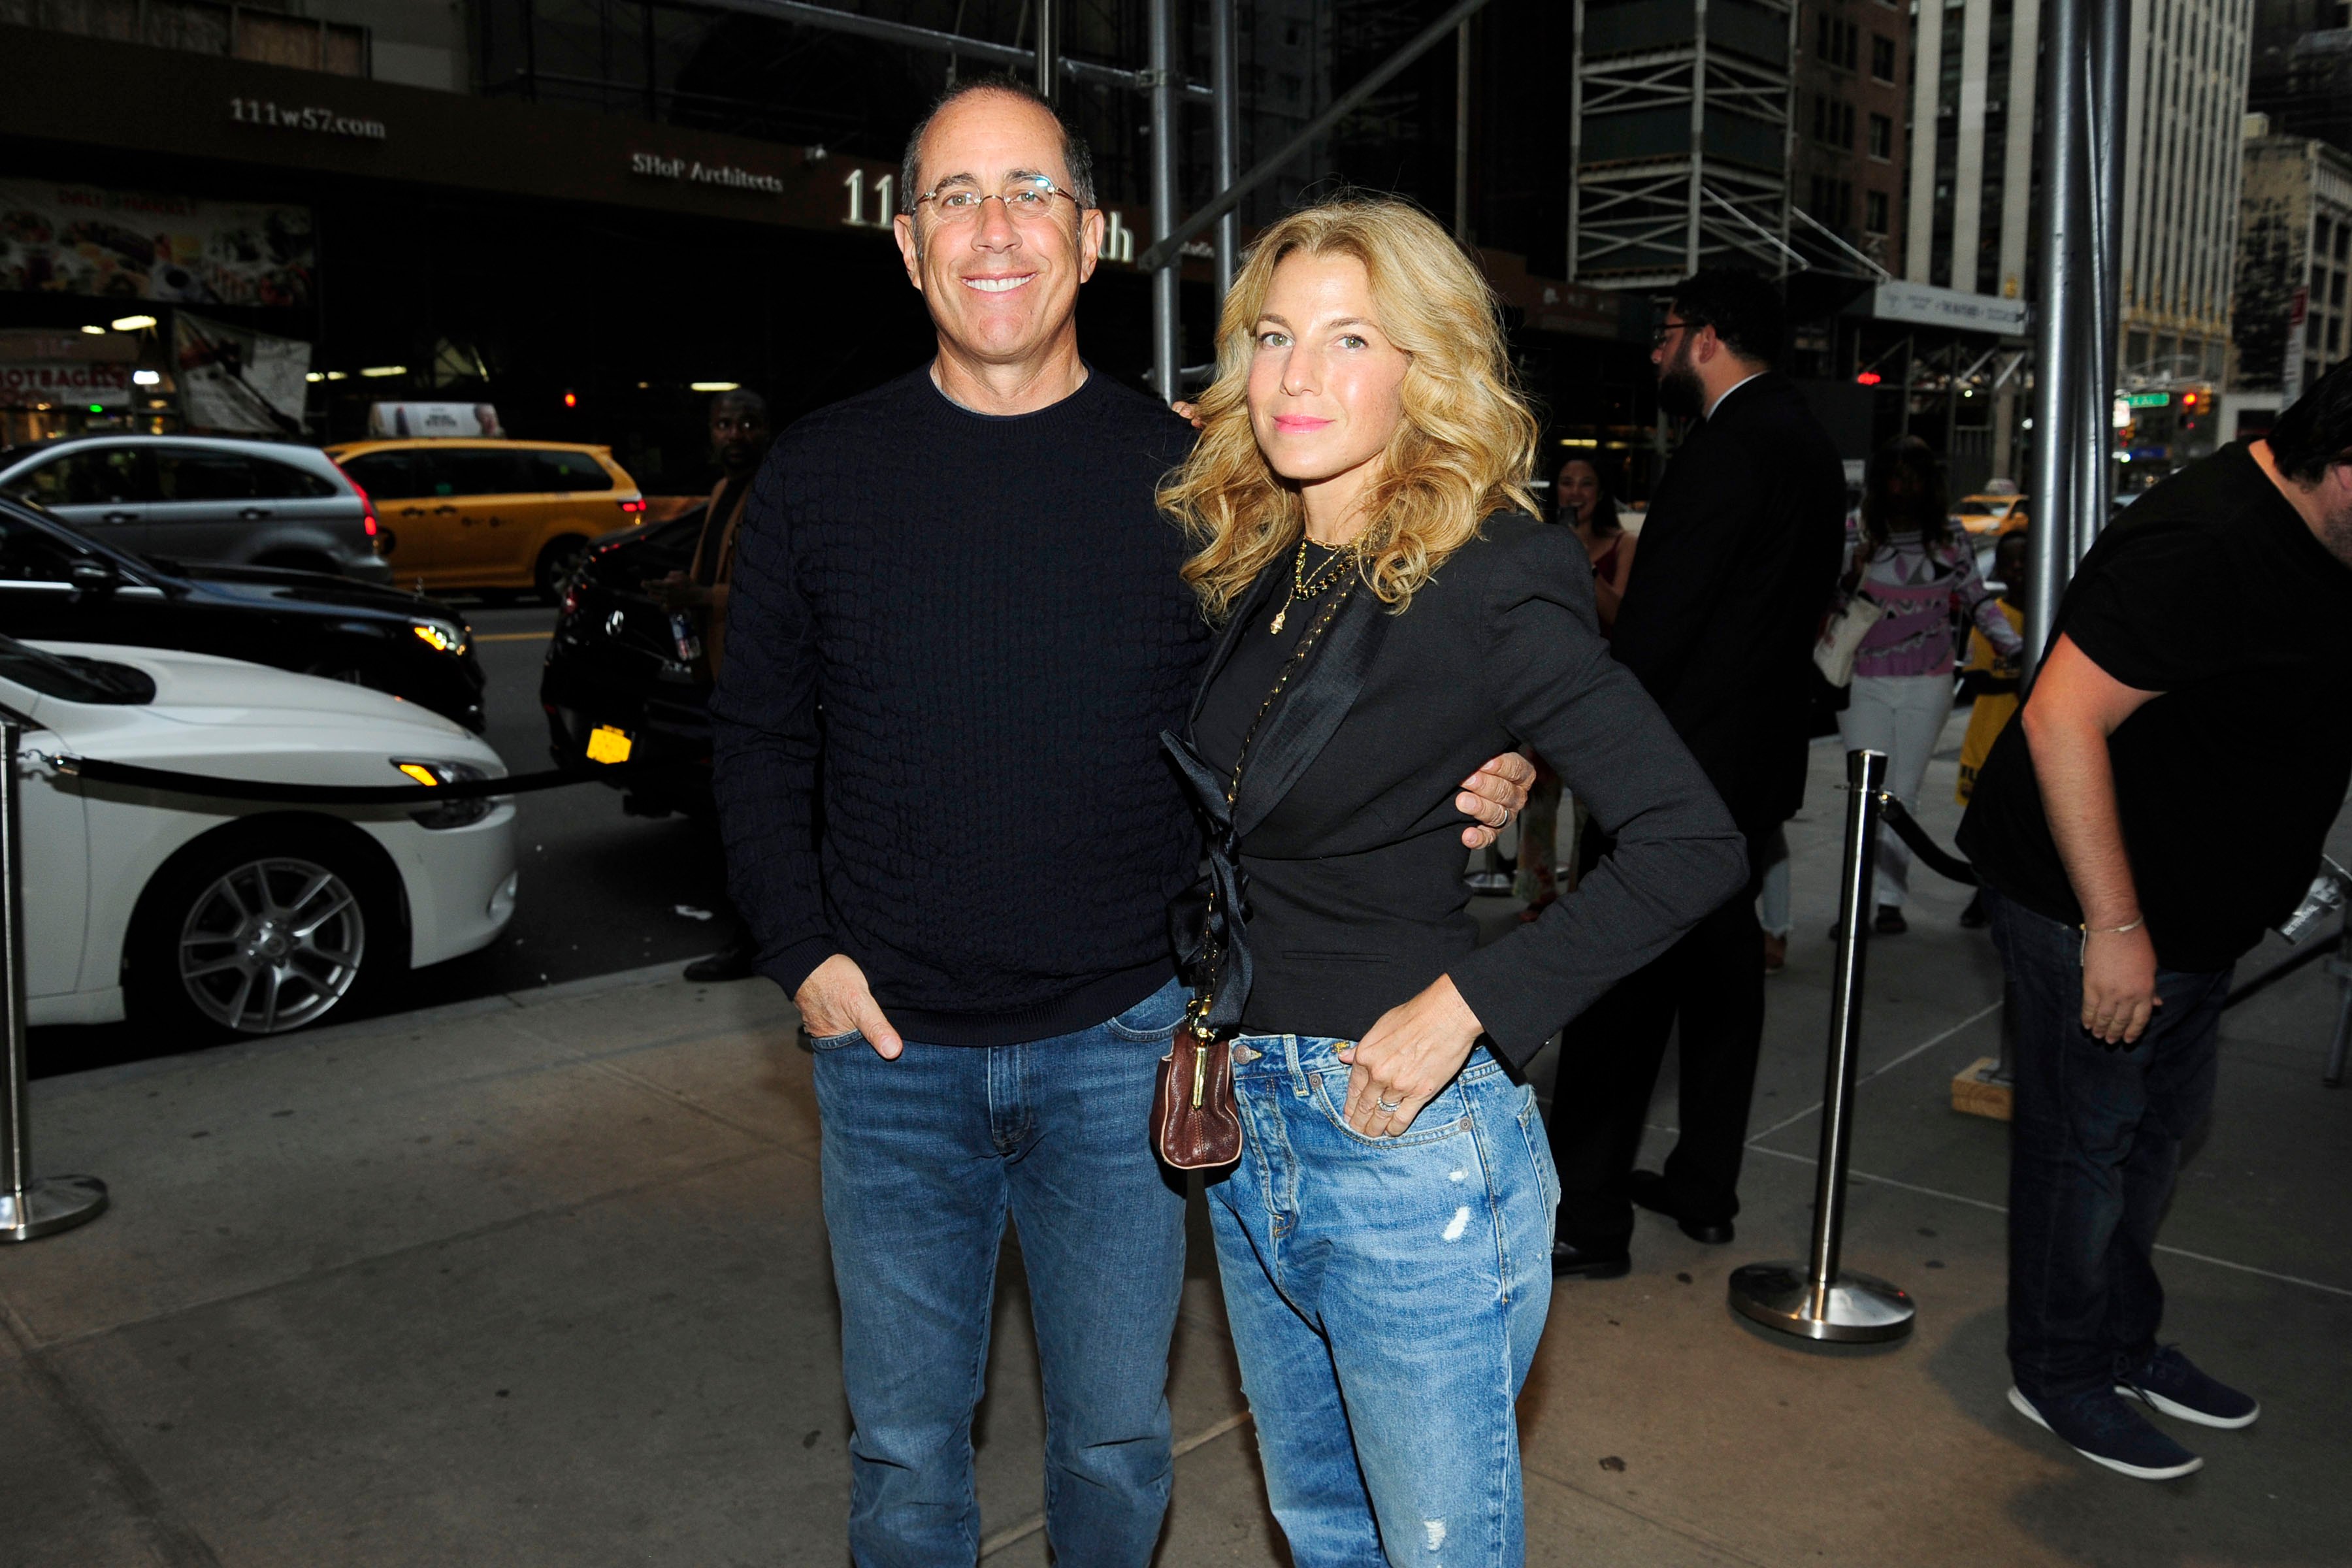 Jerry Seinfeld and Jessica Seinfeld attend a screening of 'Just Mercy' in 2019